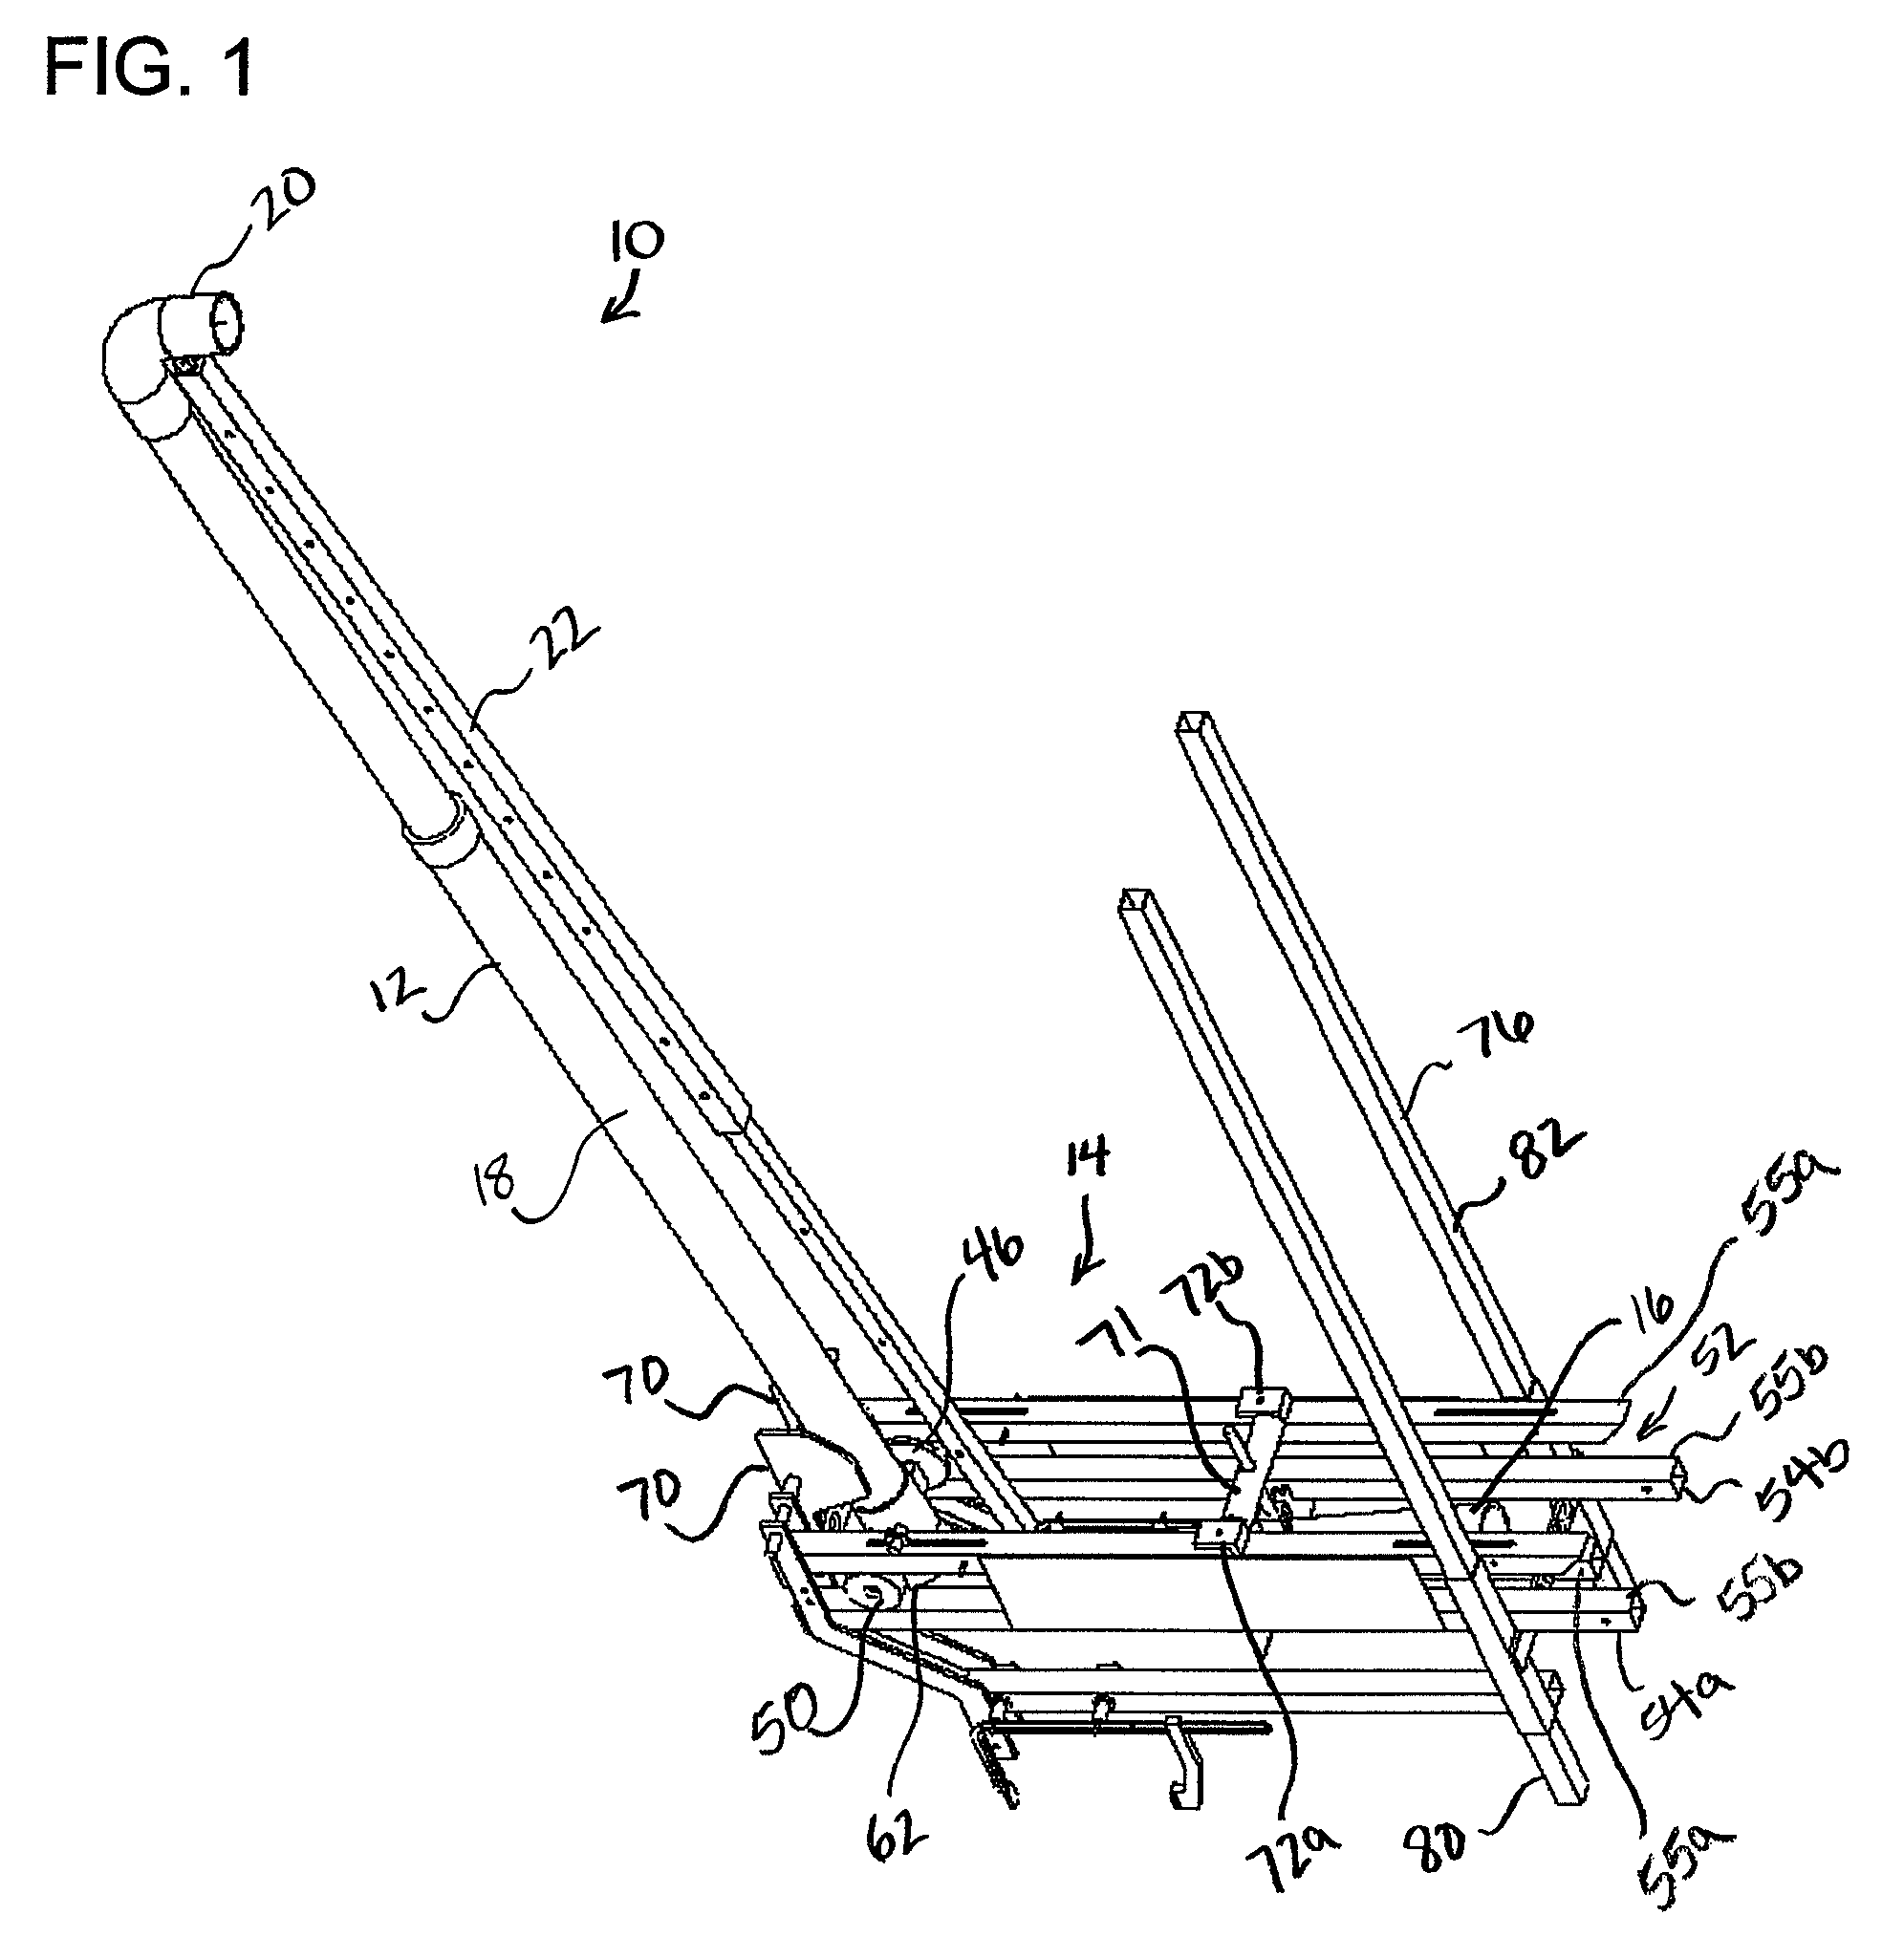 Apparatus and method for extinguishing fires in a multi-floored building